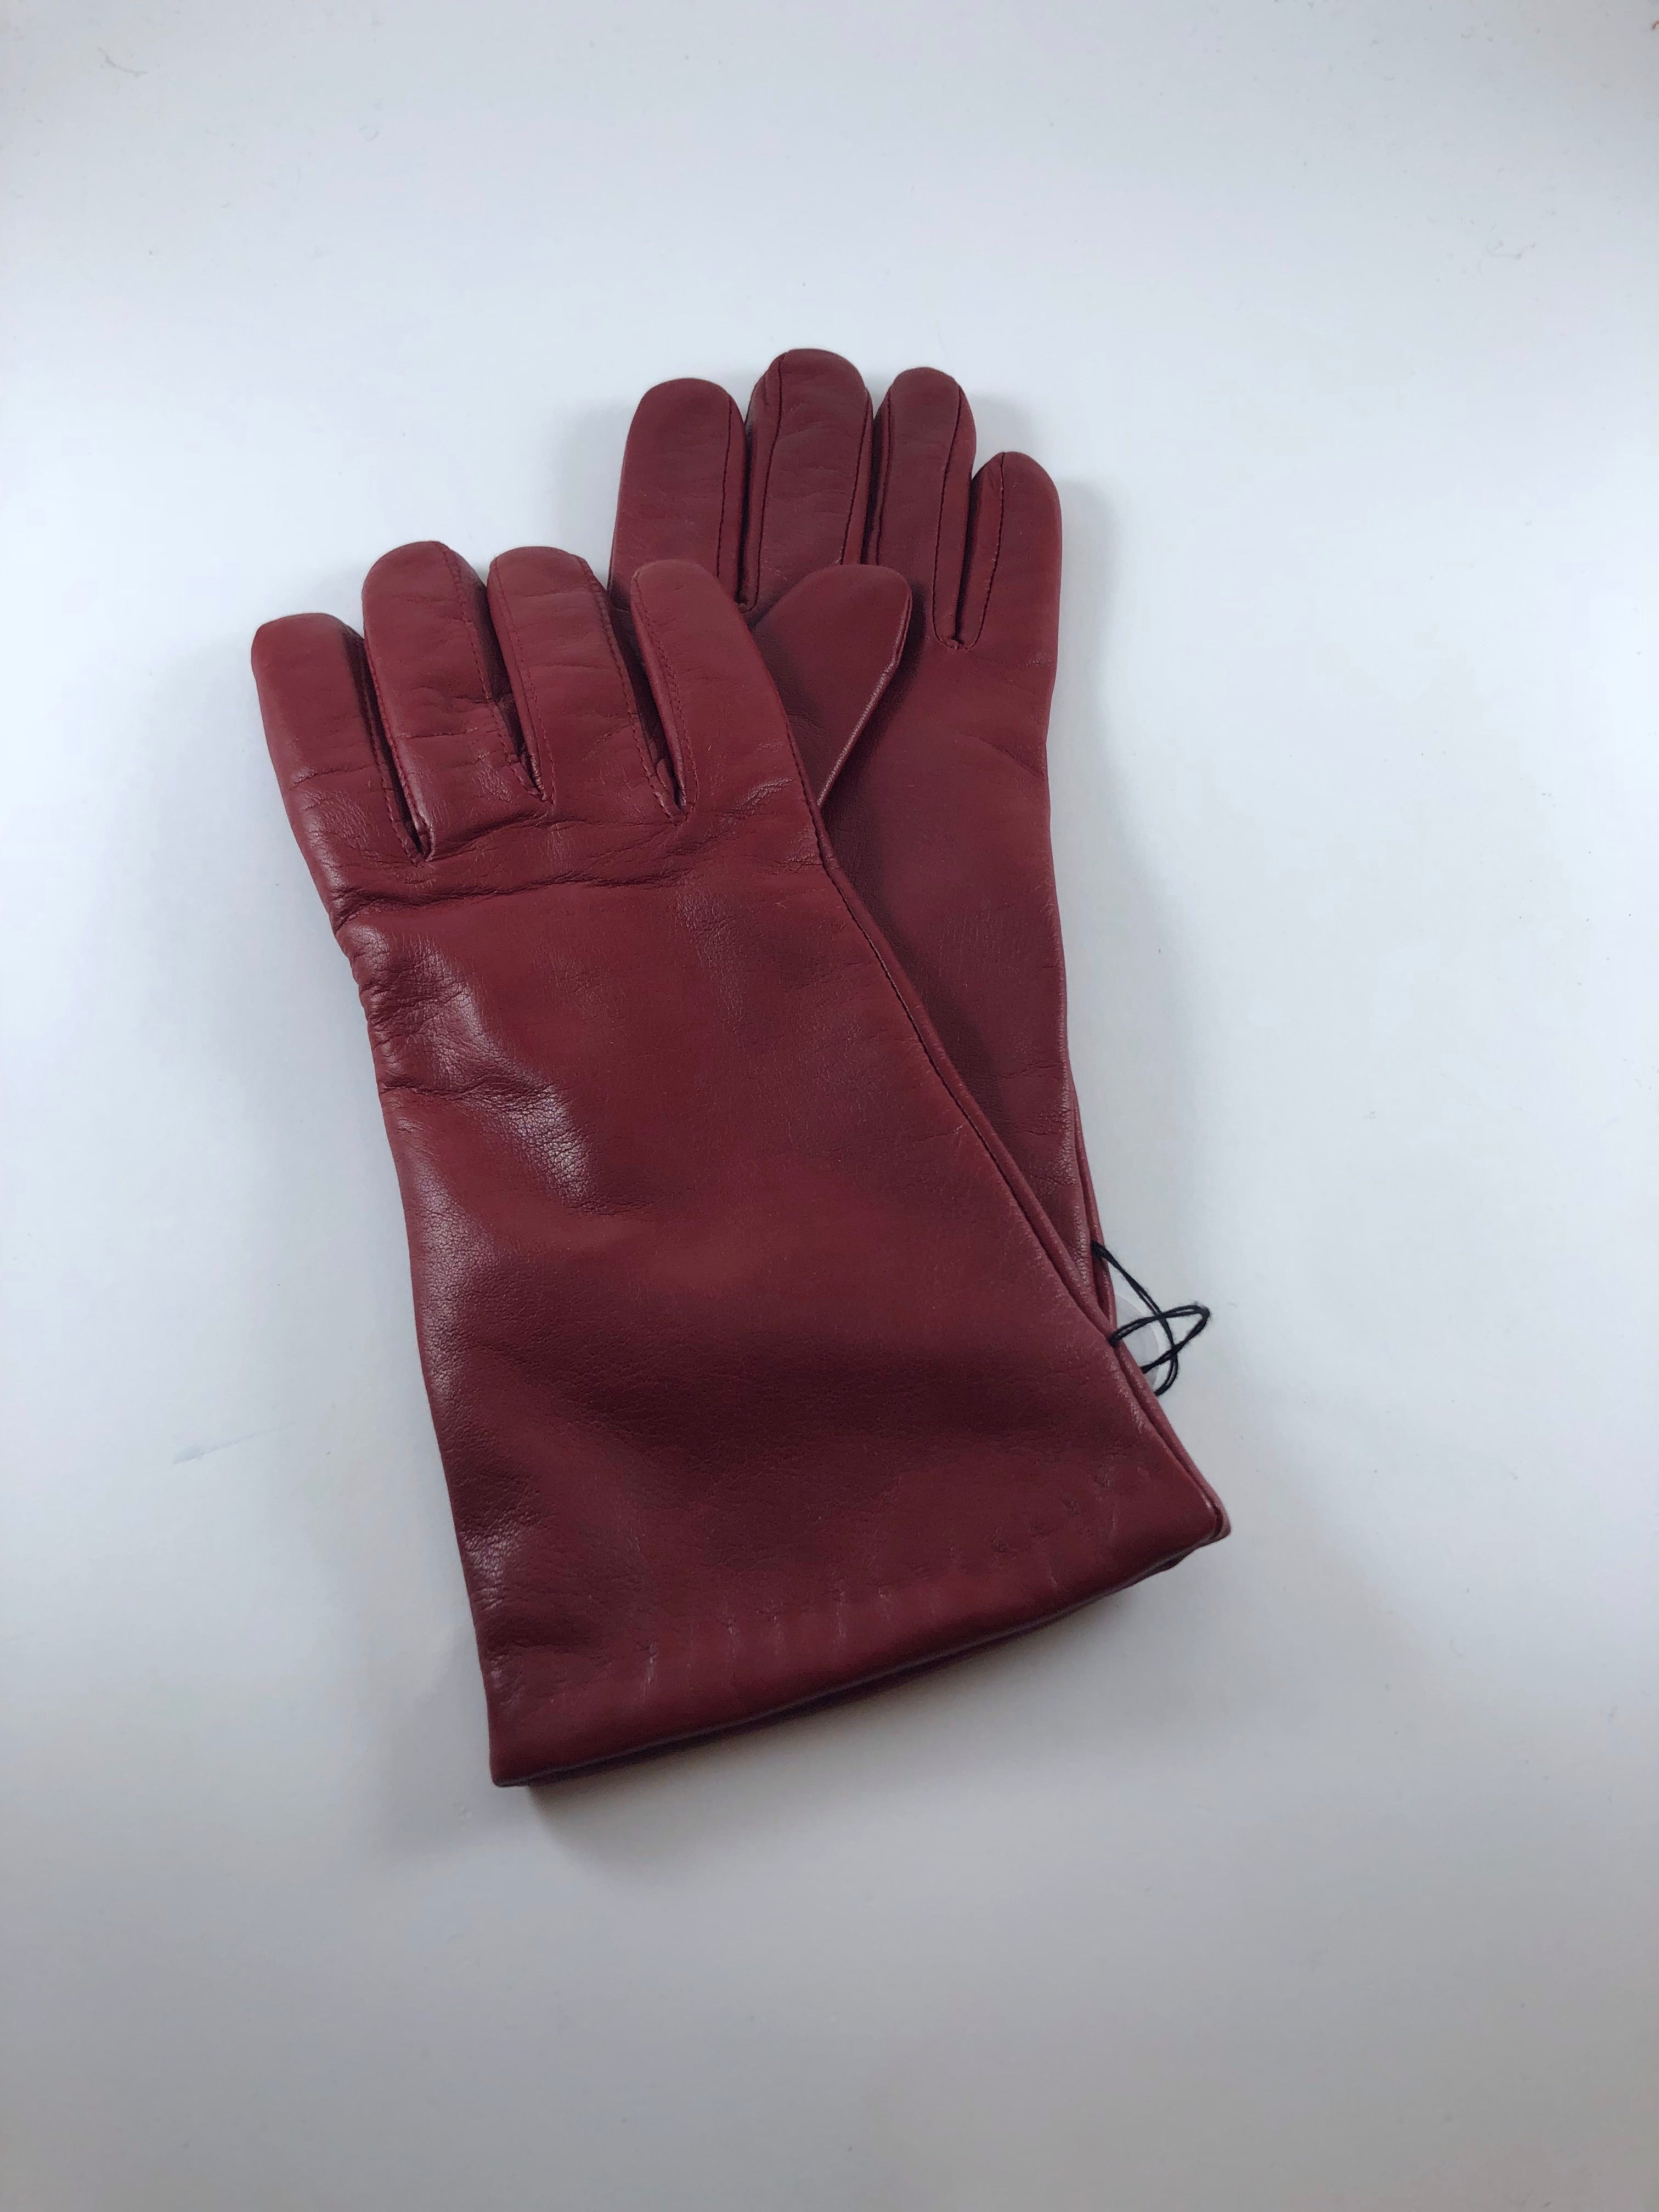 Ruby Italian Leather gloves cashmere lined – Mickle Macks Haberdashery